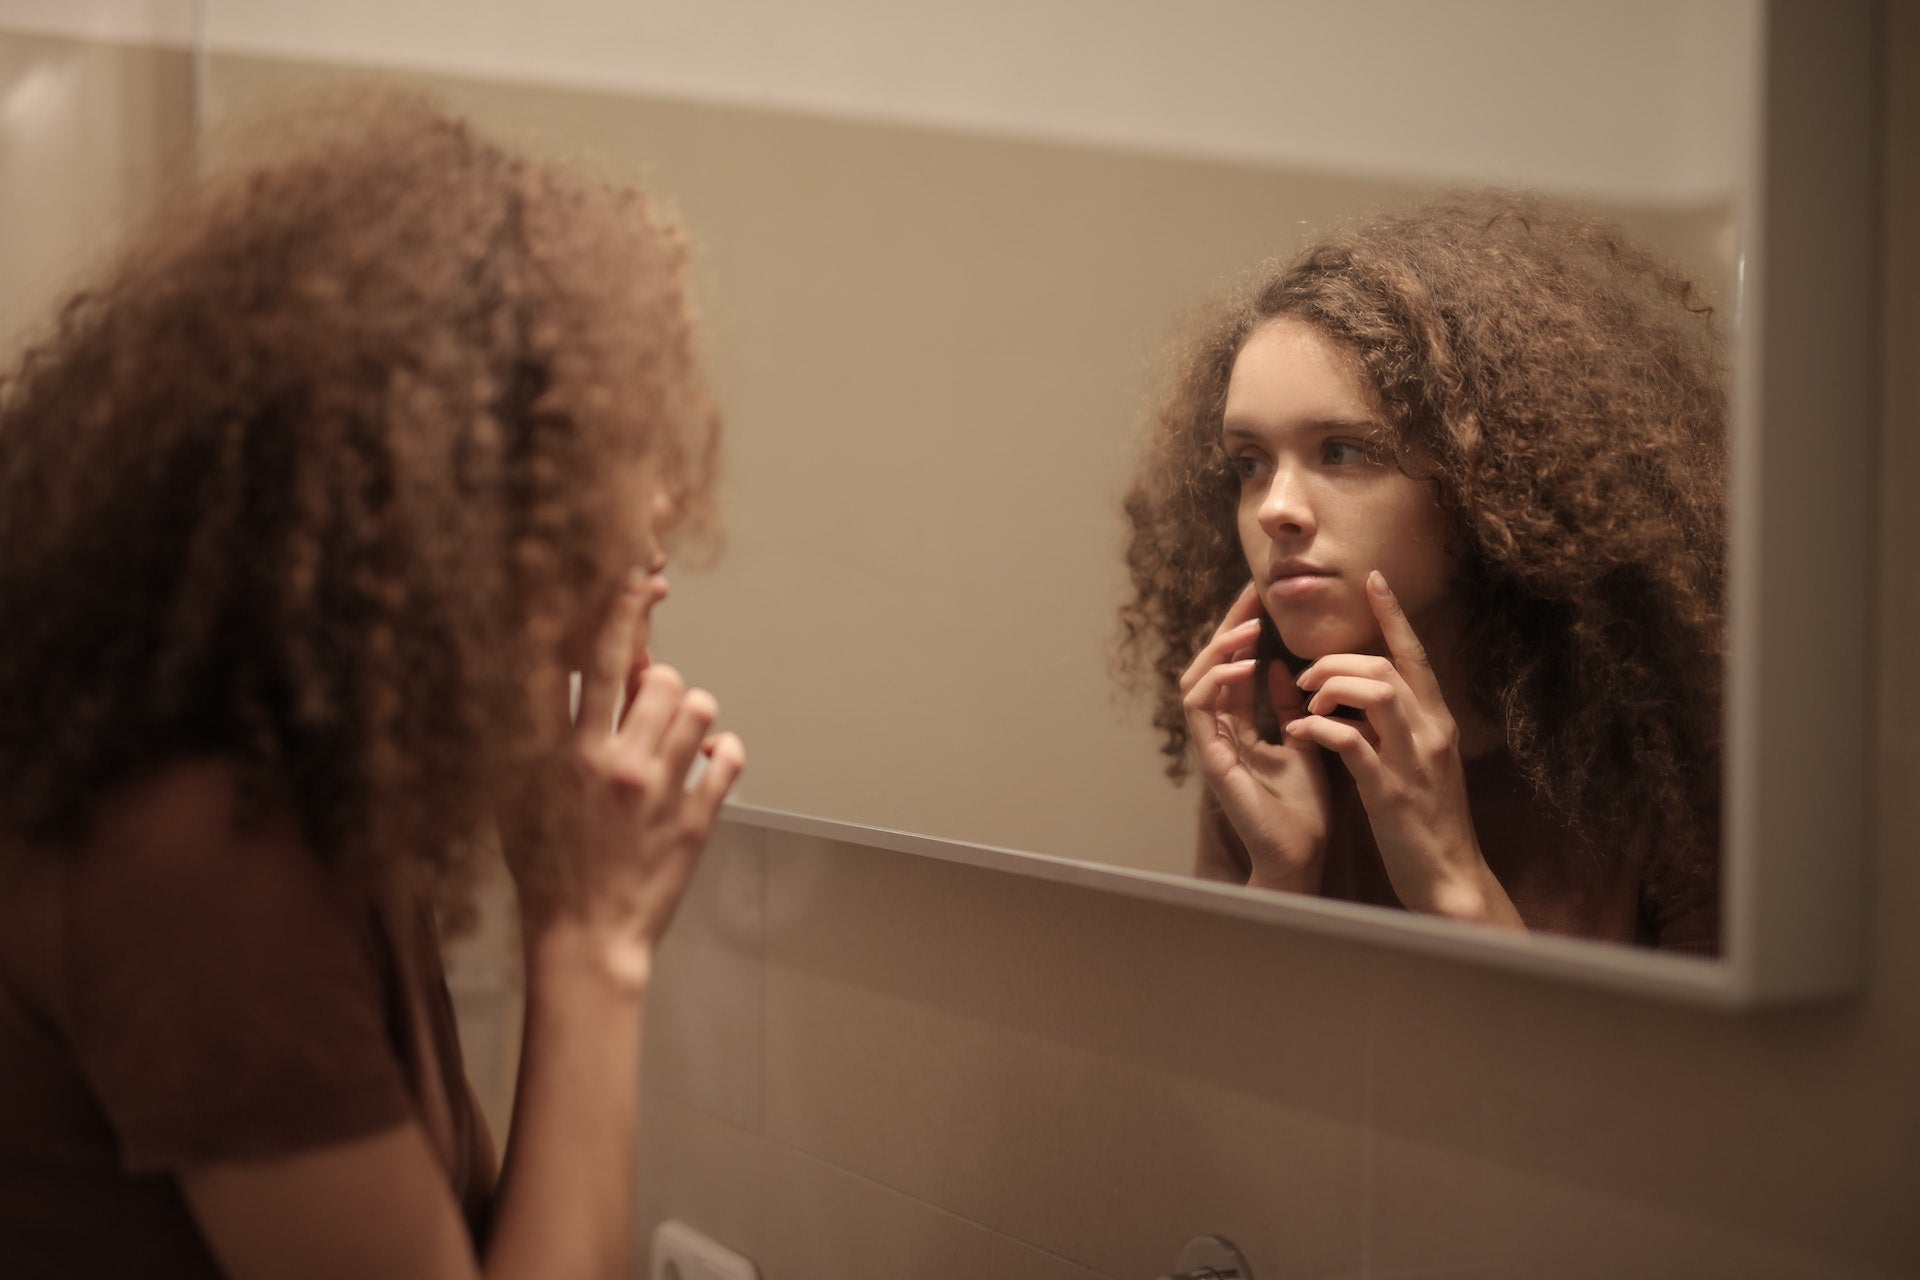 A teen girl with curly hair looks at her skin in a mirror. She looks unhappy.